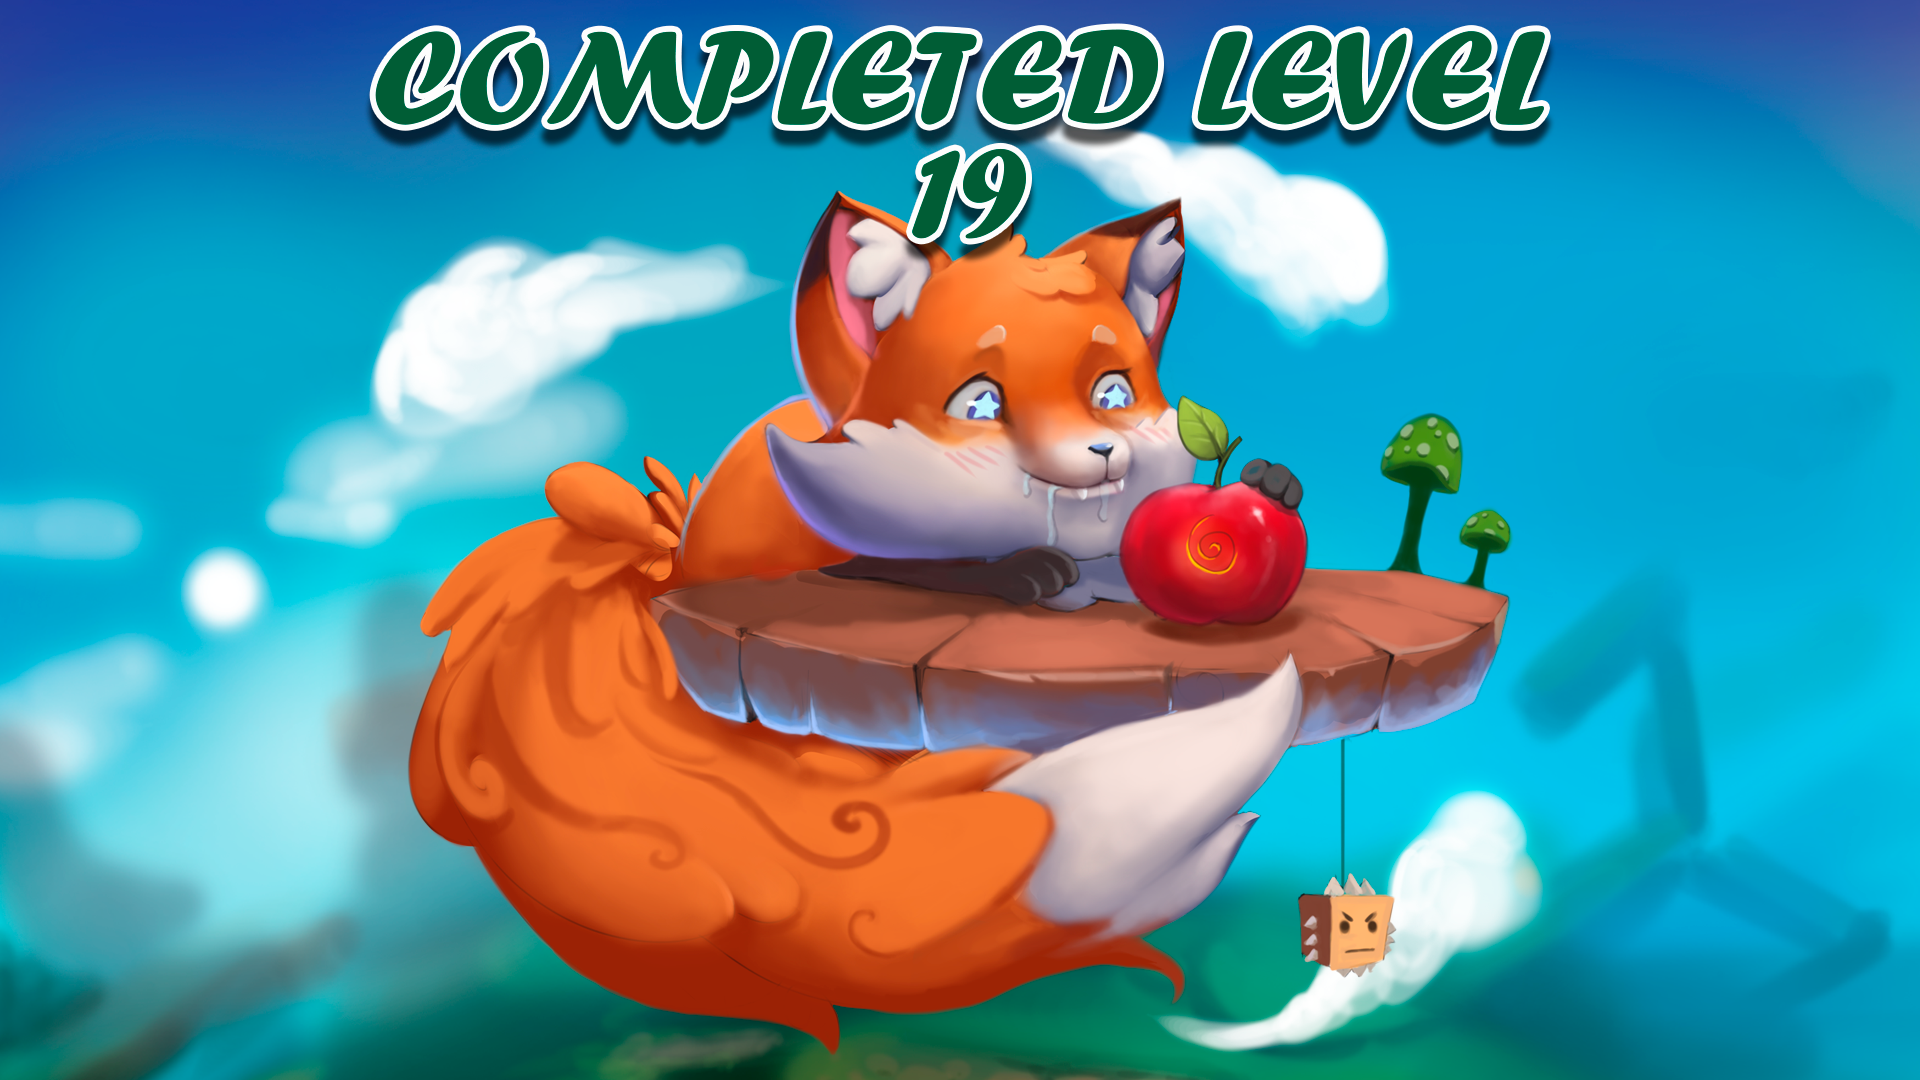 19 levels completed